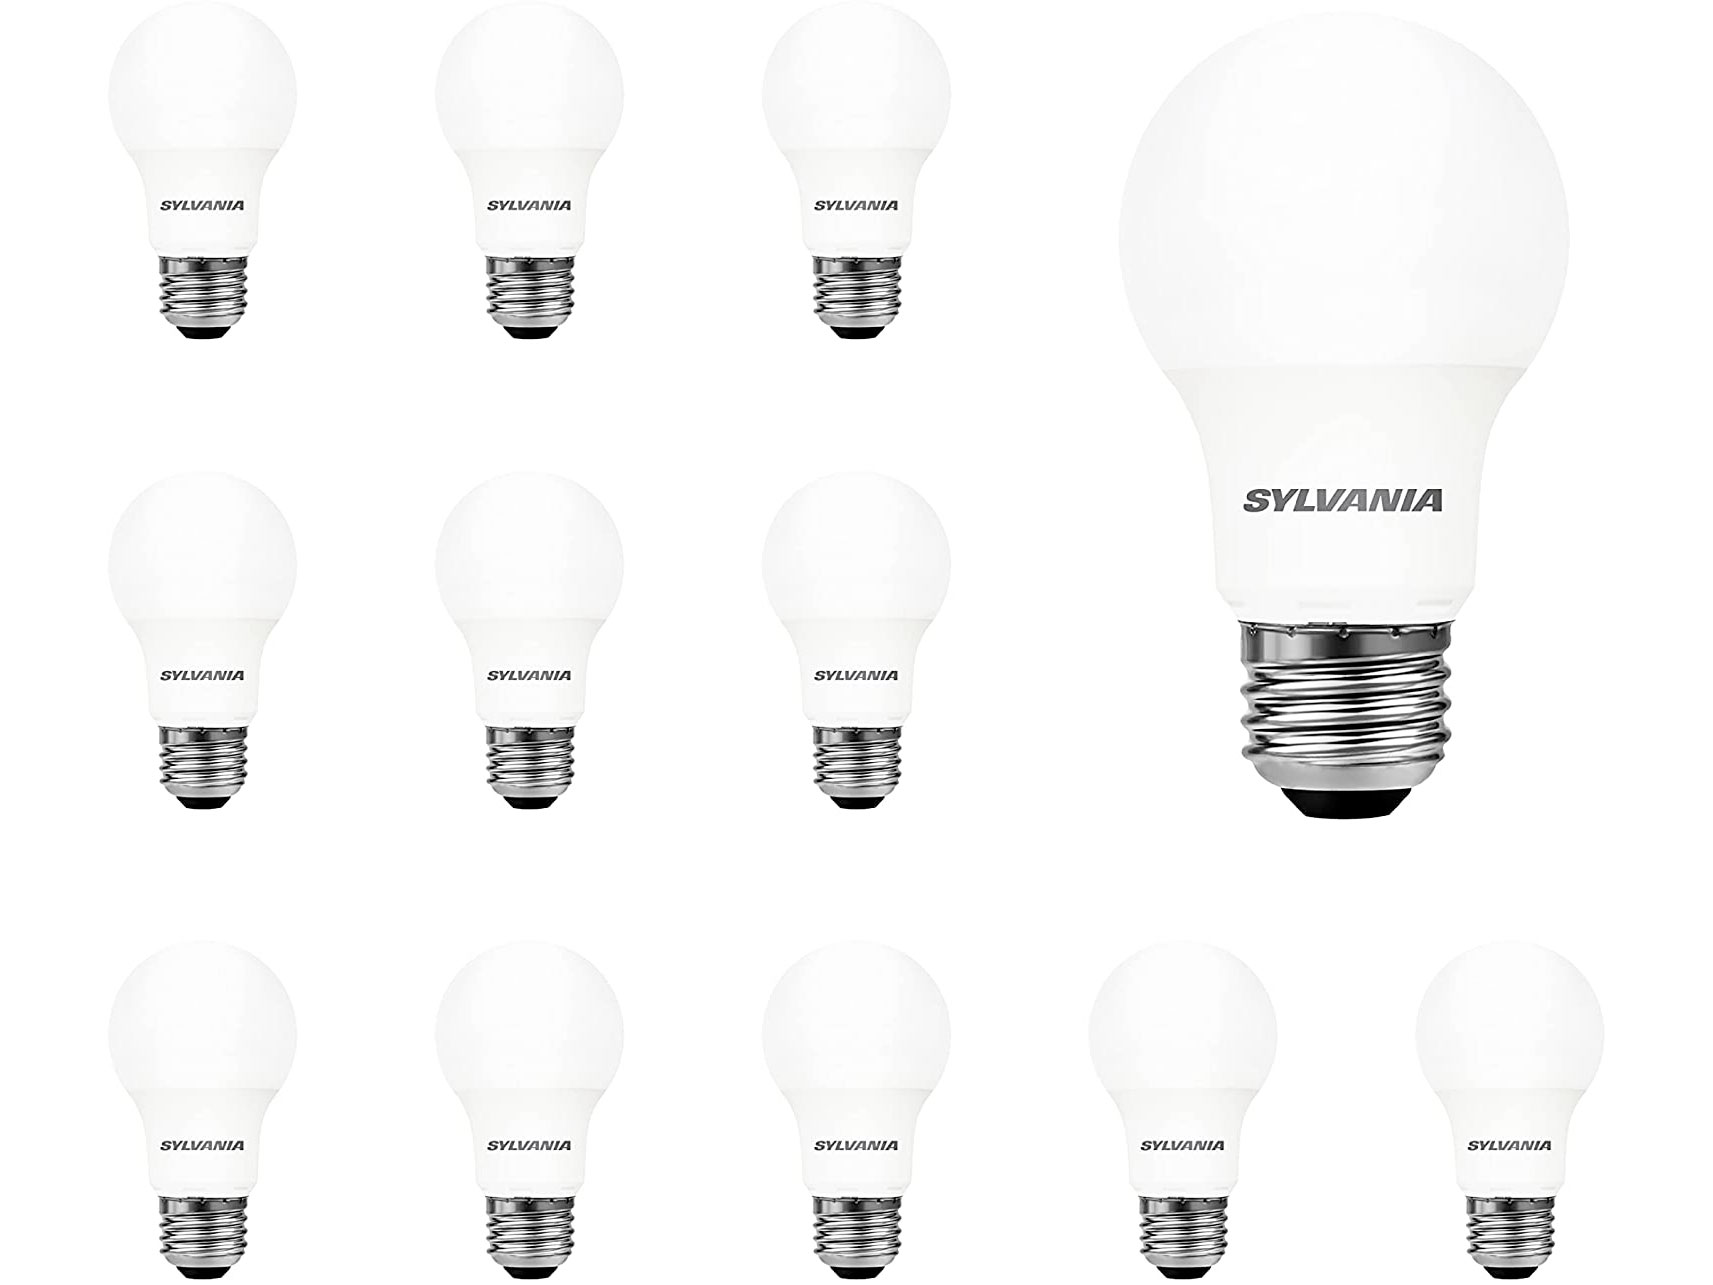 Amazon：SYLVANIA LED 60W A19 Daylight Non Dimmable燈膽 (12 Pack) 只賣$24.70